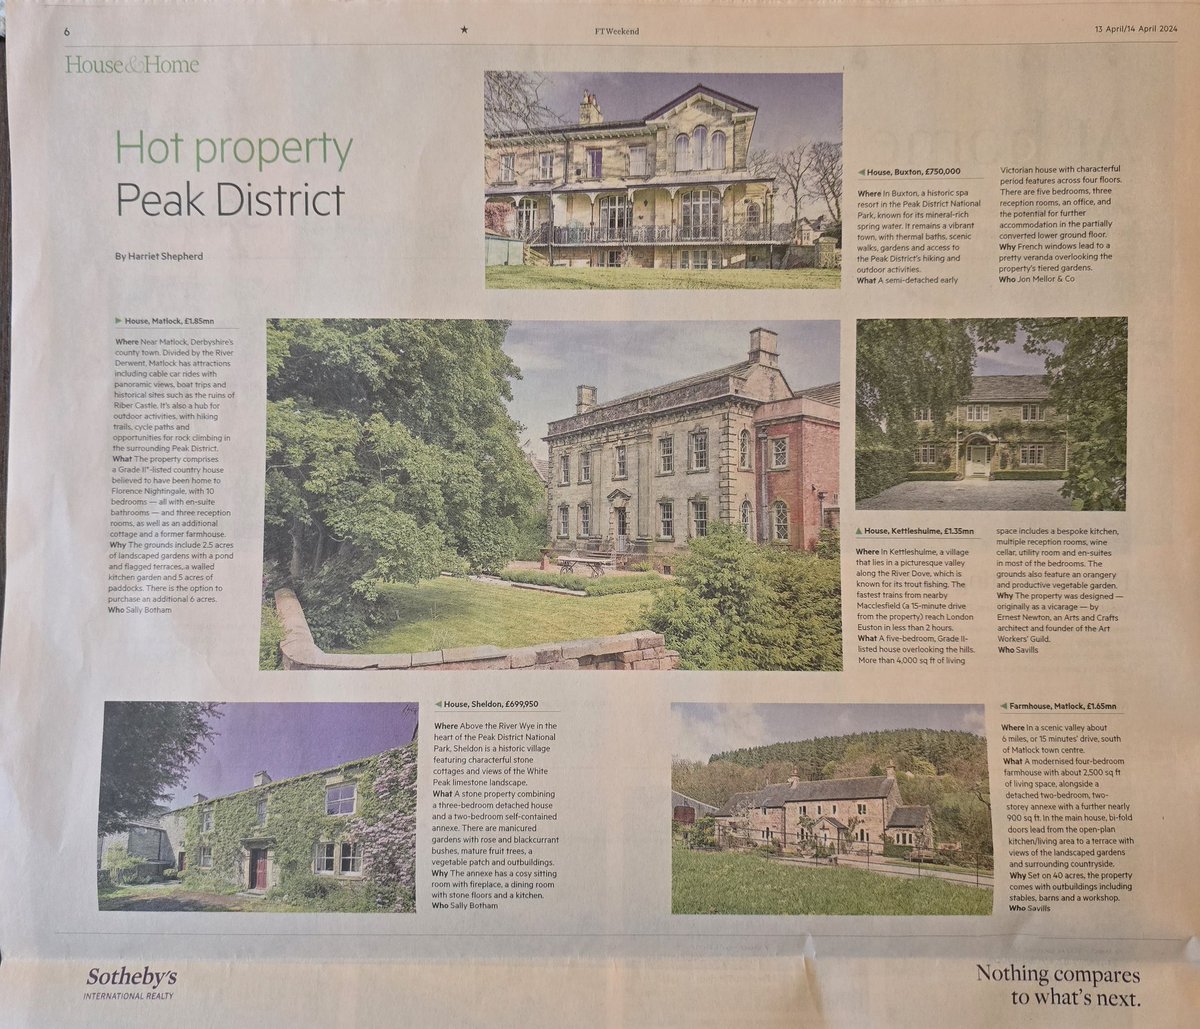 Ohhh the Peak District* in the @FT House and Home section! *Albeit not Glossop...